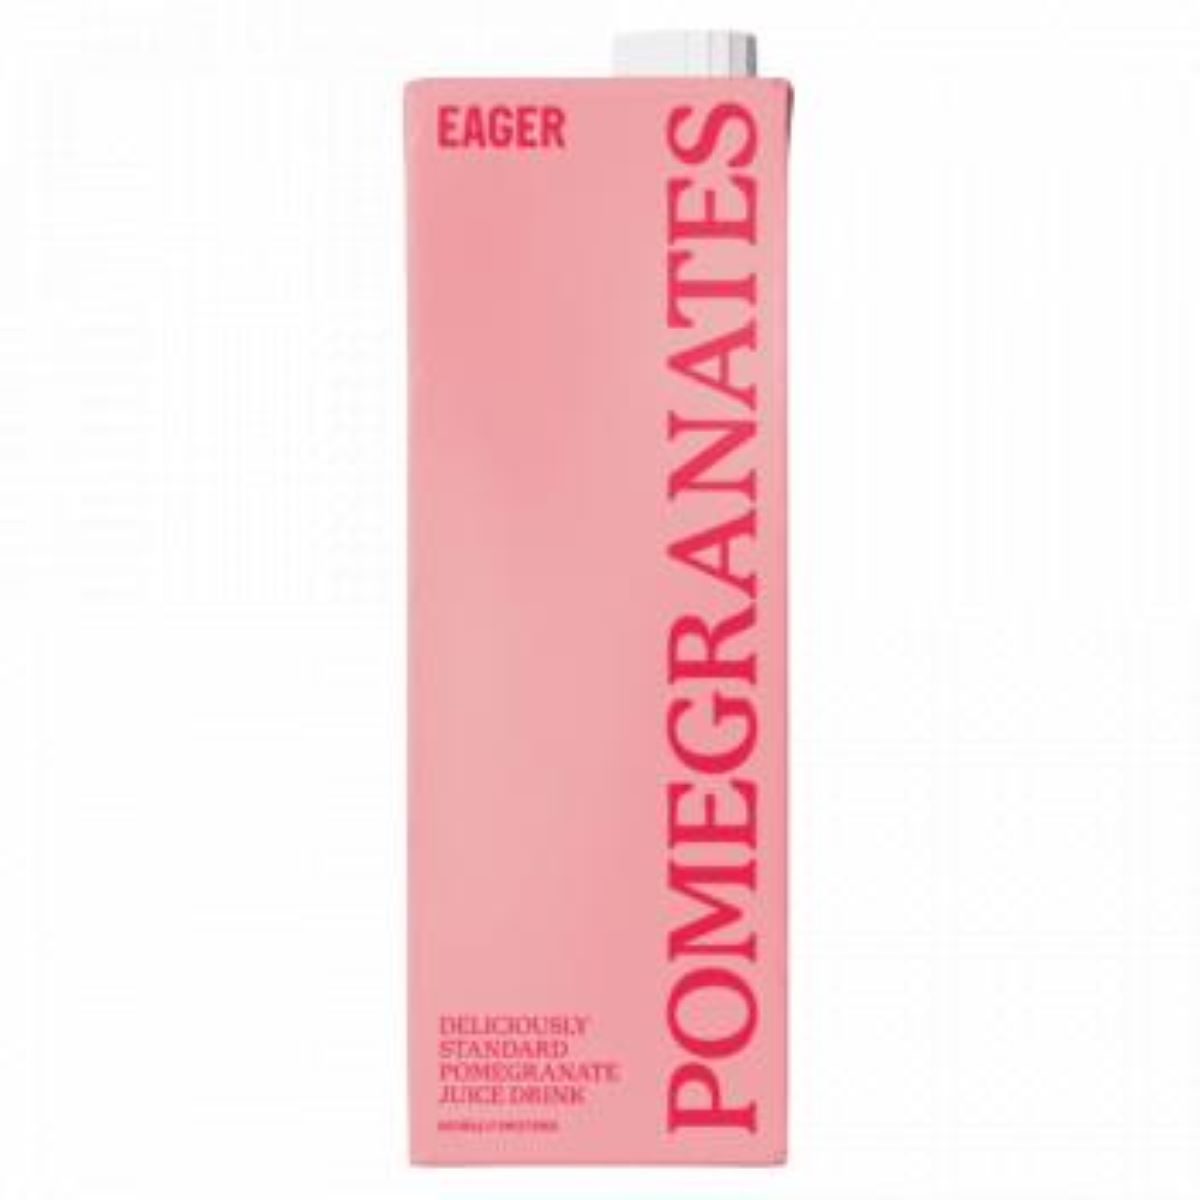 Eager Deliciously Standard Pomegranate Juice Drink 1L